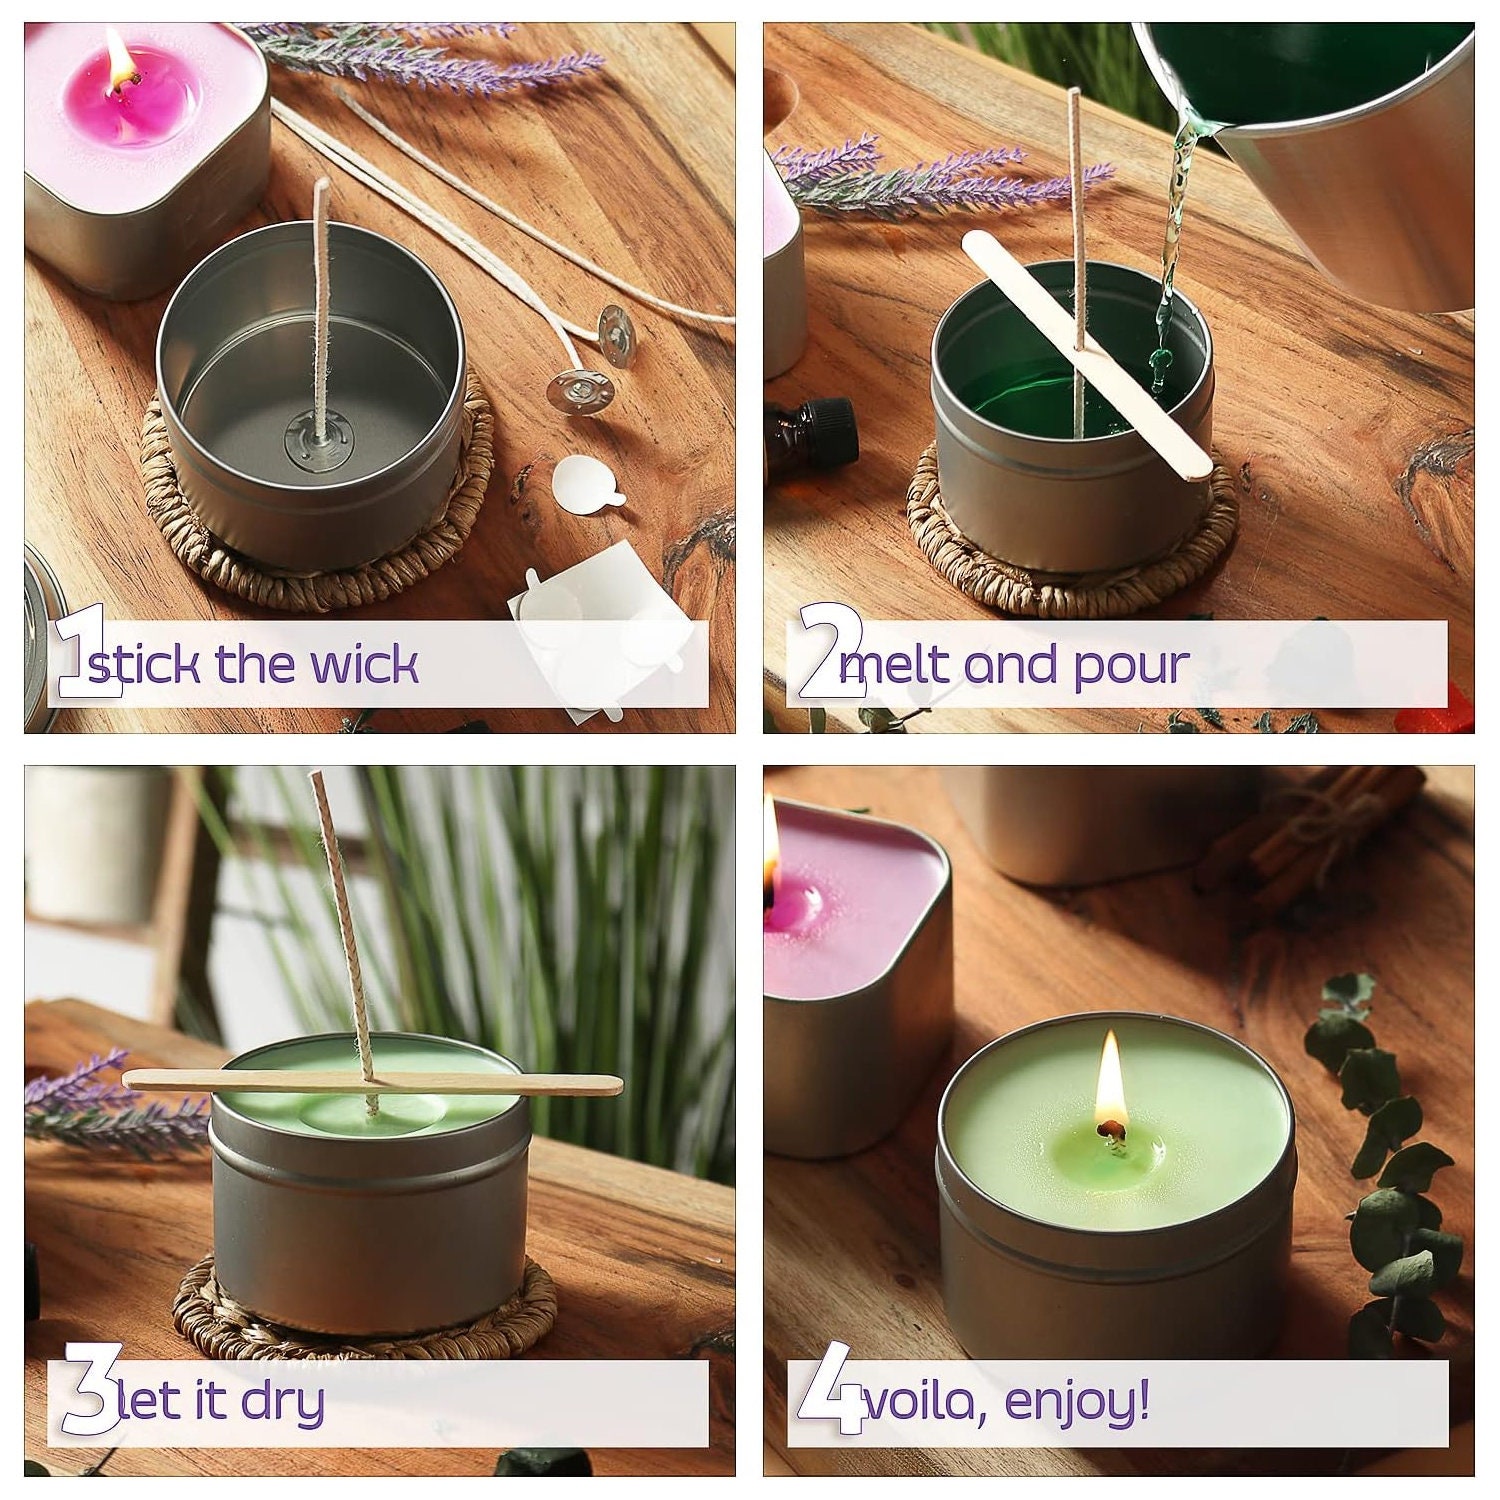  Vutlue Candle Making Kit, Soy Wax Candle Making Kits for  Adults, Beginners, Kids Including Wax, Wicks, 4 Kinds of Scents, Dyes,  Melting Pot, Candle tins- DIY Arts and Crafts Candles Making